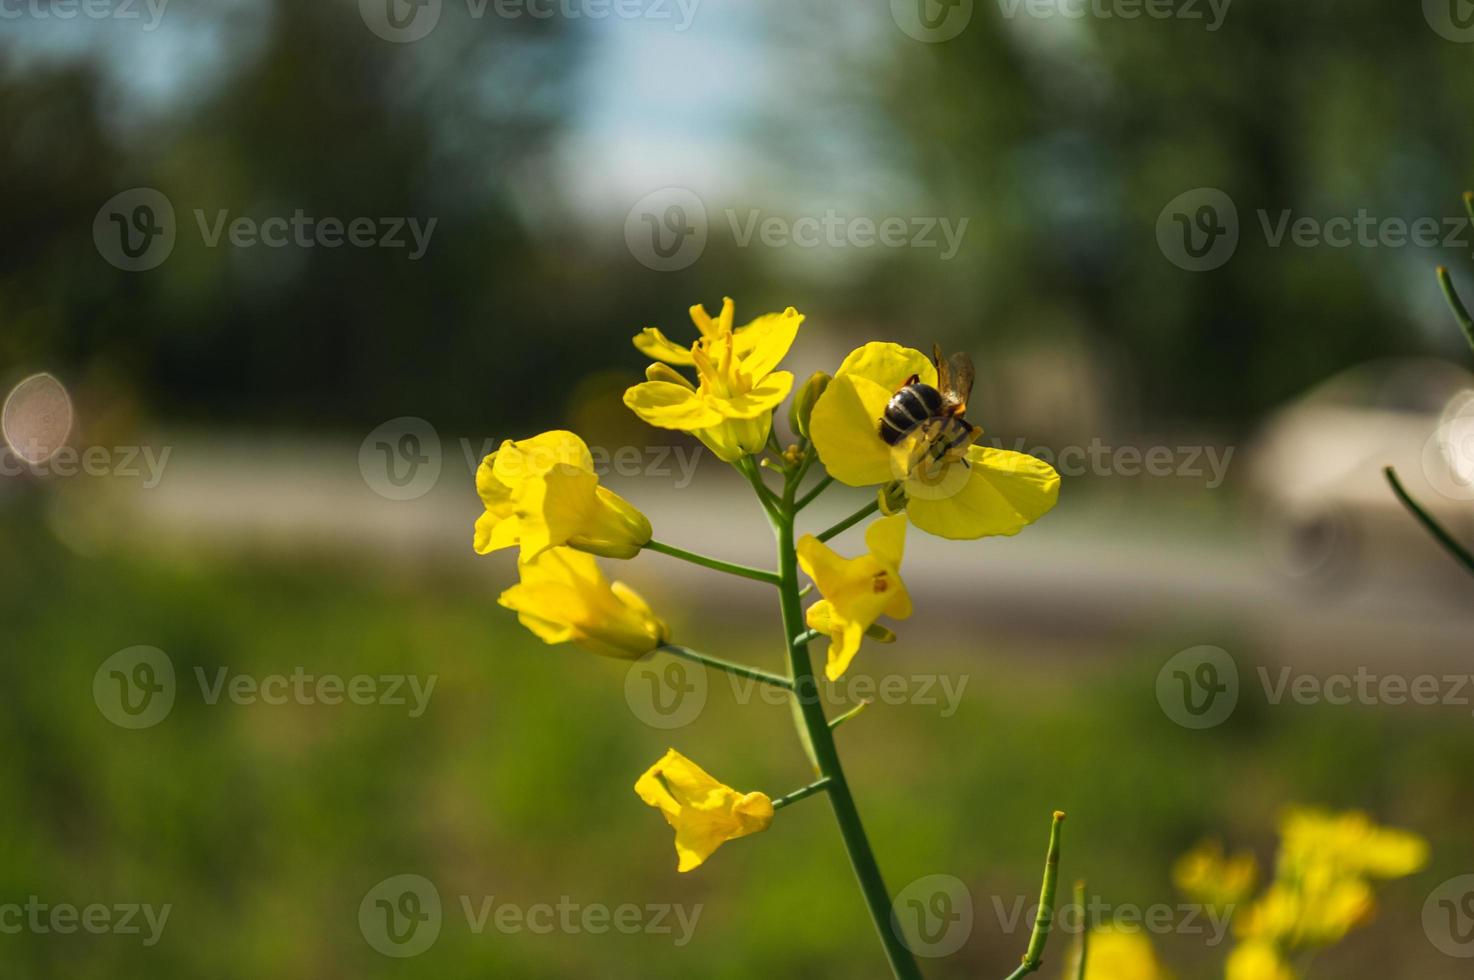 Yellow rapeseed or canola flowers, grown for the rapeseed oil photo